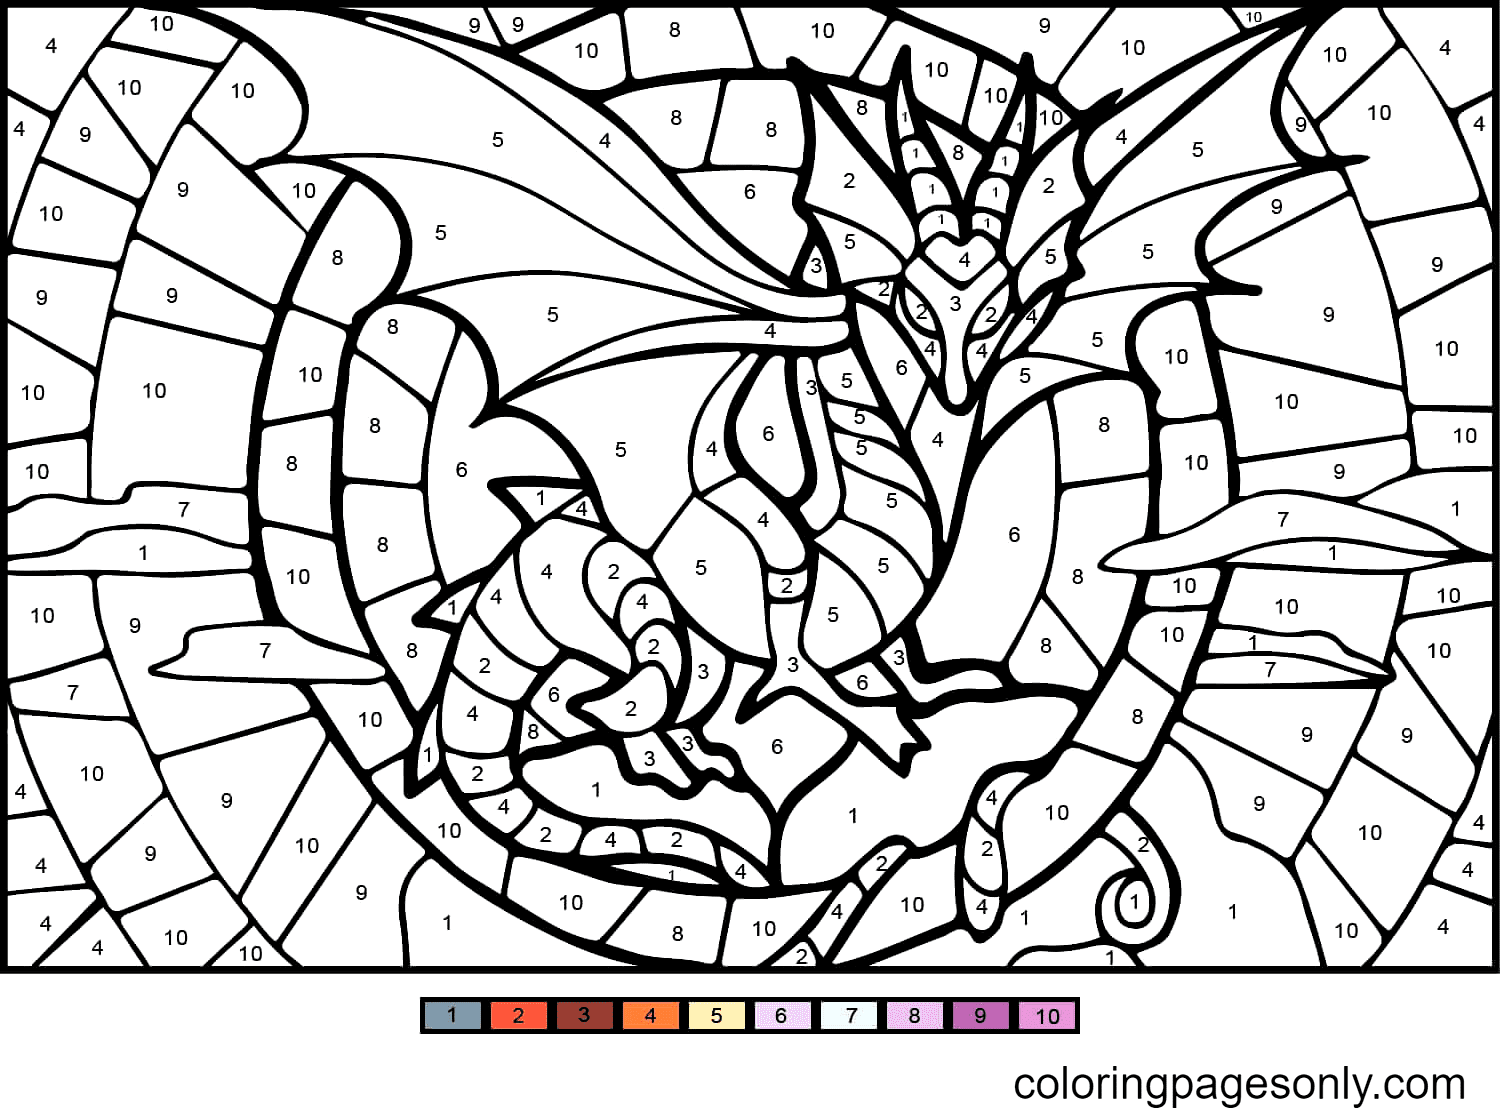 Dragon Color by Number Coloring Page